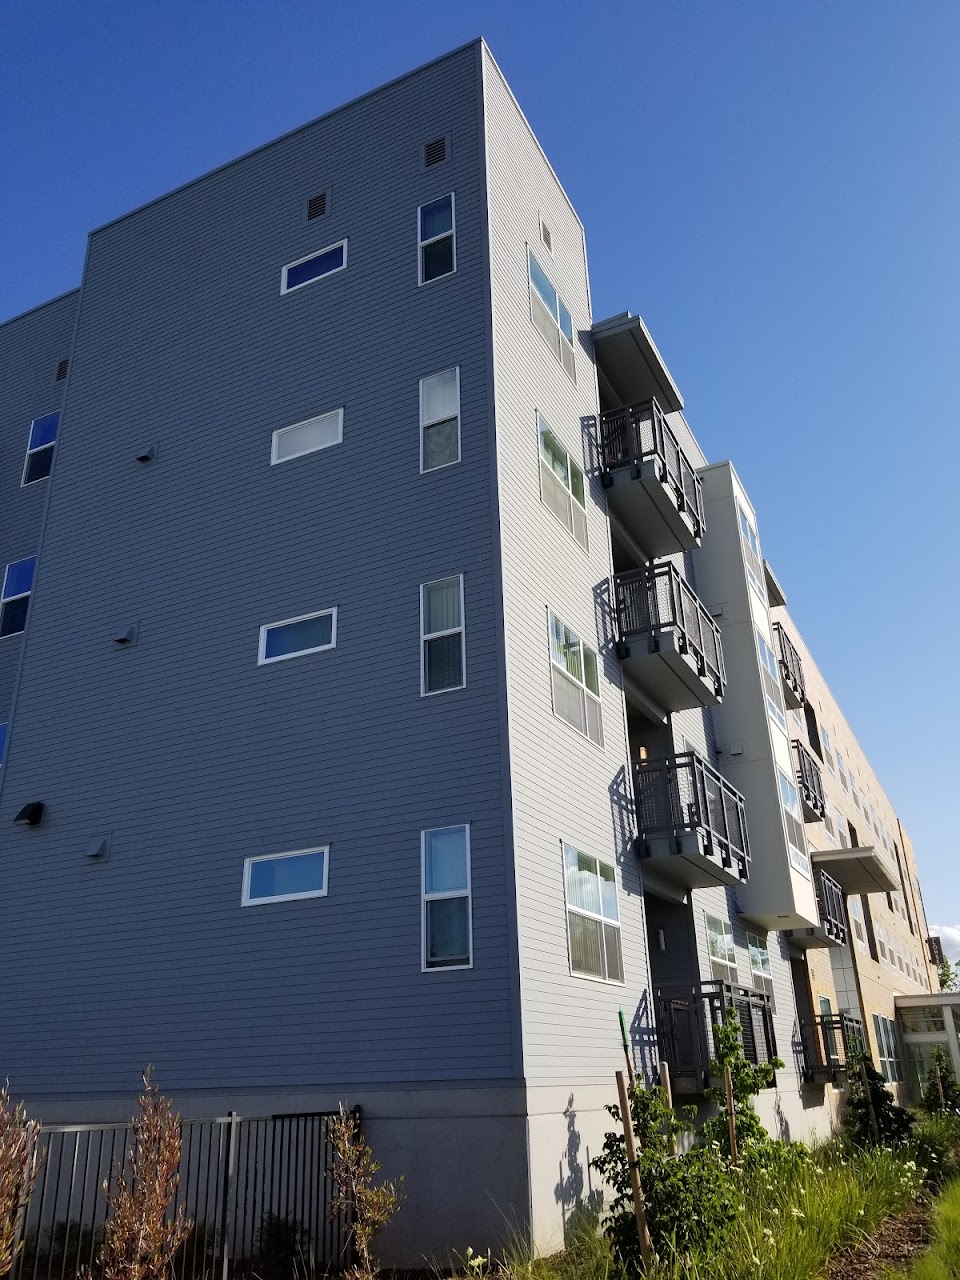 Photo of THE FREDERIC LOSHE APARTMENTS. Affordable housing located at 623 VERNON STREET ROSEVILLE, CA 95678